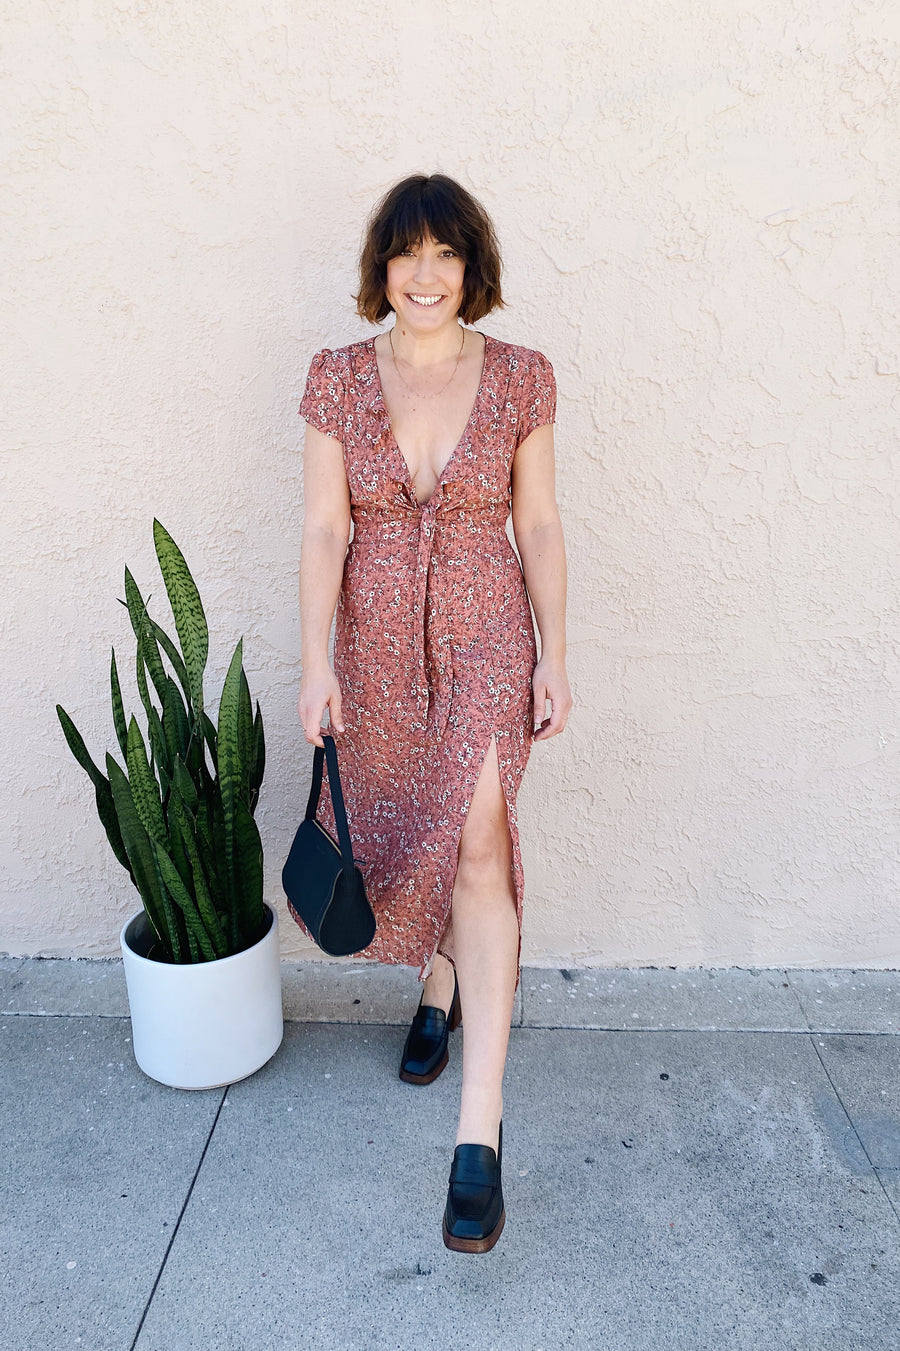 The Bree dress is not only versatile, but she’s a tad bit sexy with a leg slit and cut-out detailing on the front and back. Midi length featuring a tie front and ruffled details. Made in Los Angeles.